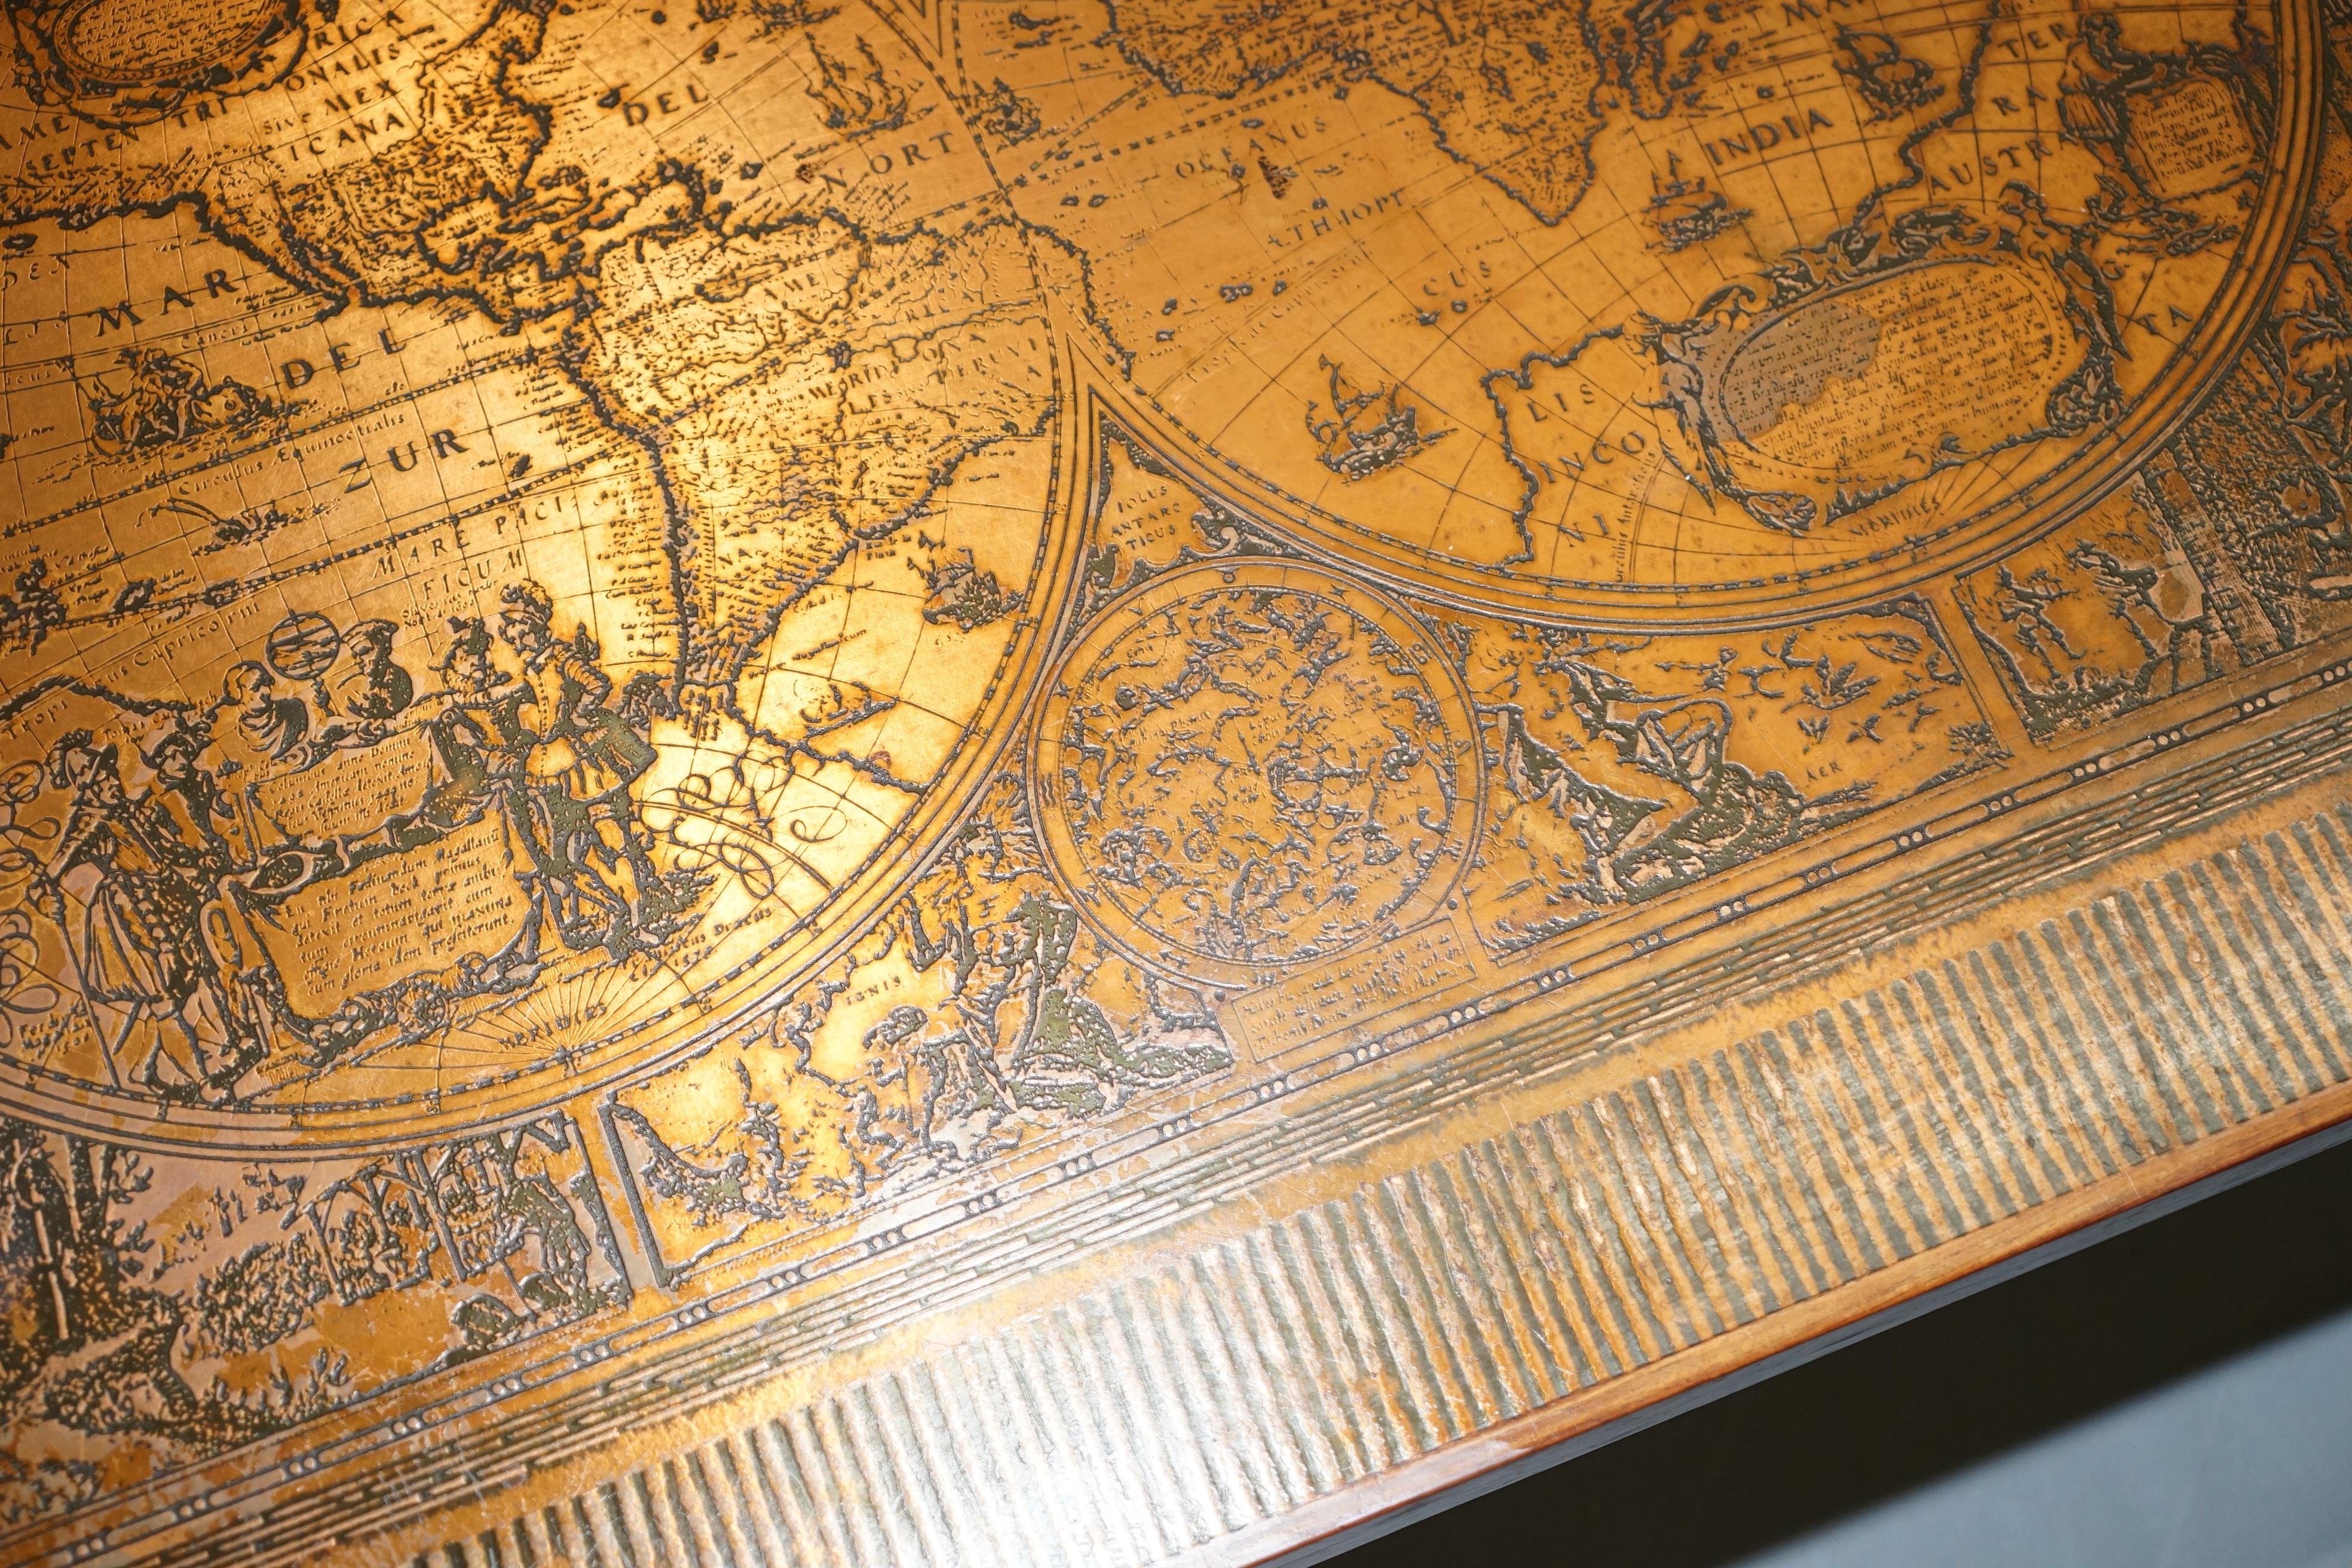 British Engraved Copper Plate Campaign Coffee Table World Map Roman Calendar Months